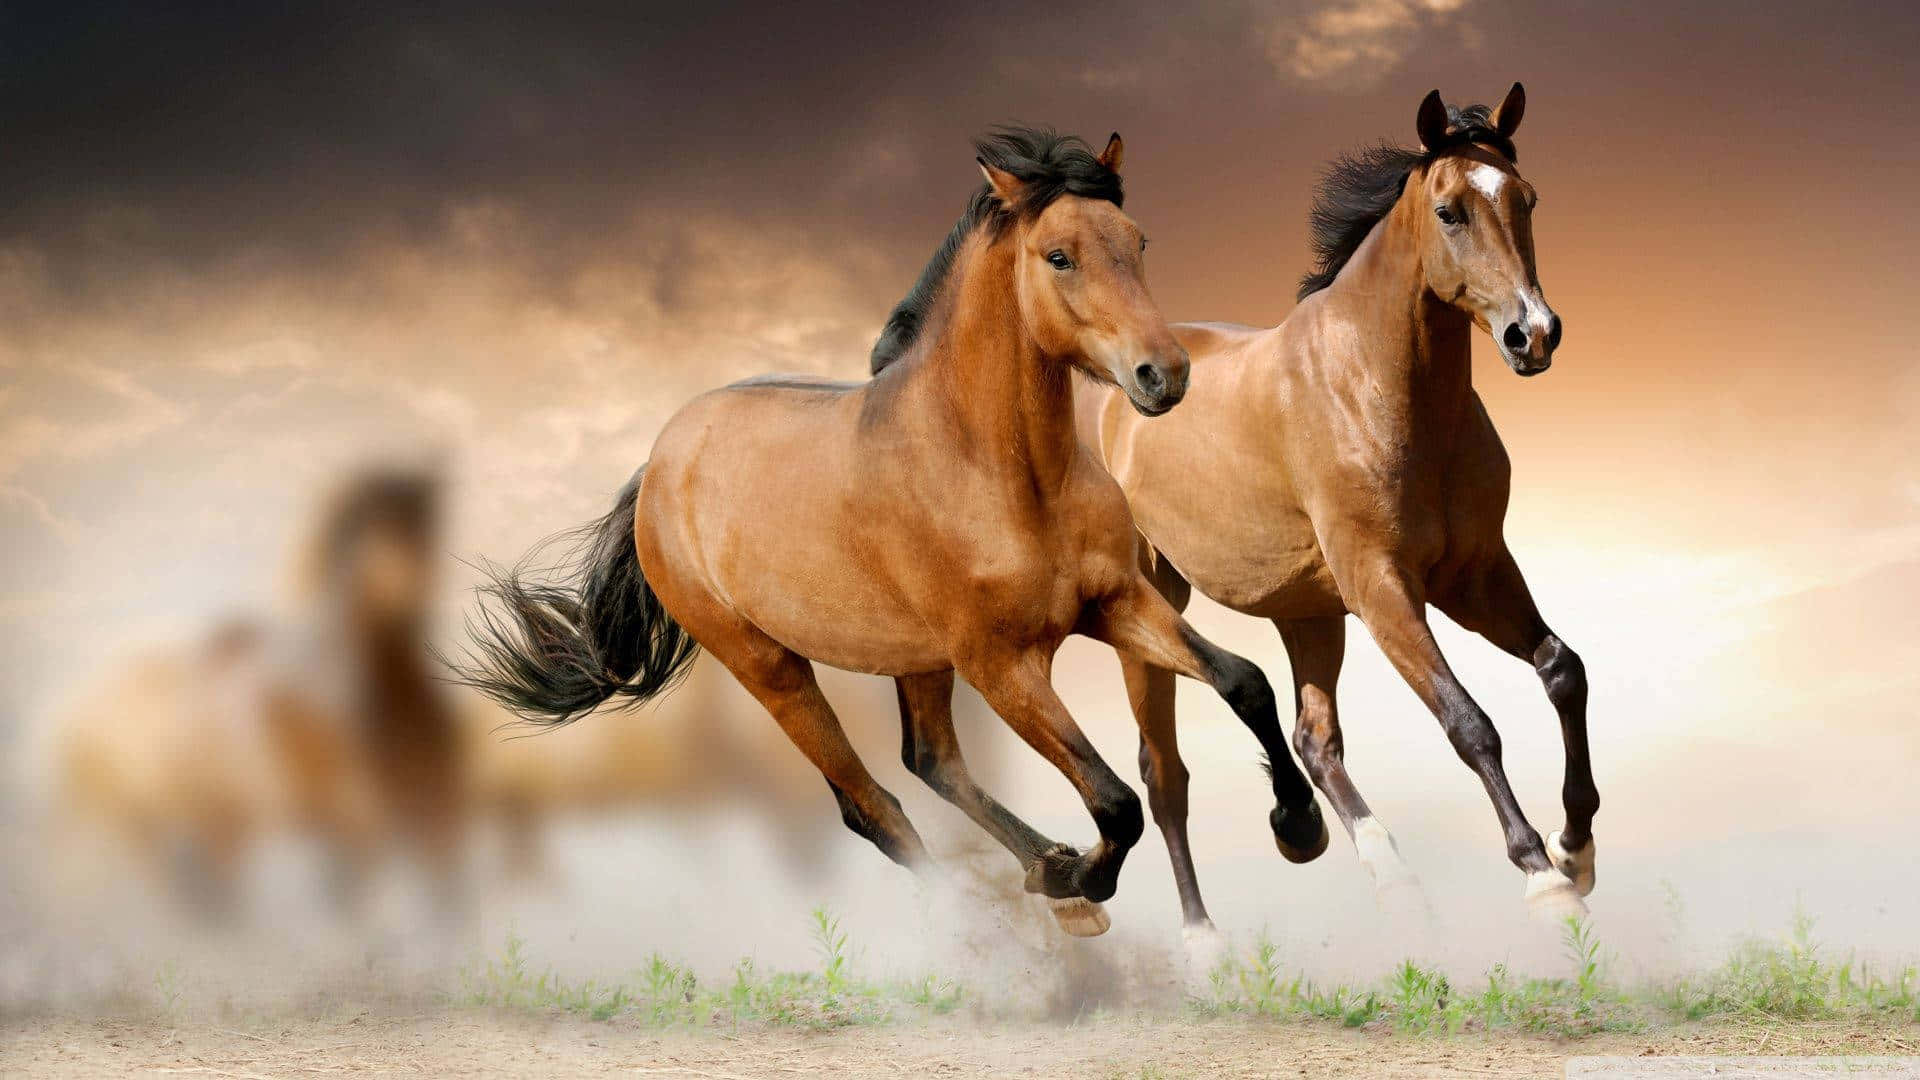 "Wild, brave and cool as can be, this horse exemplifies what it means to be free" Wallpaper